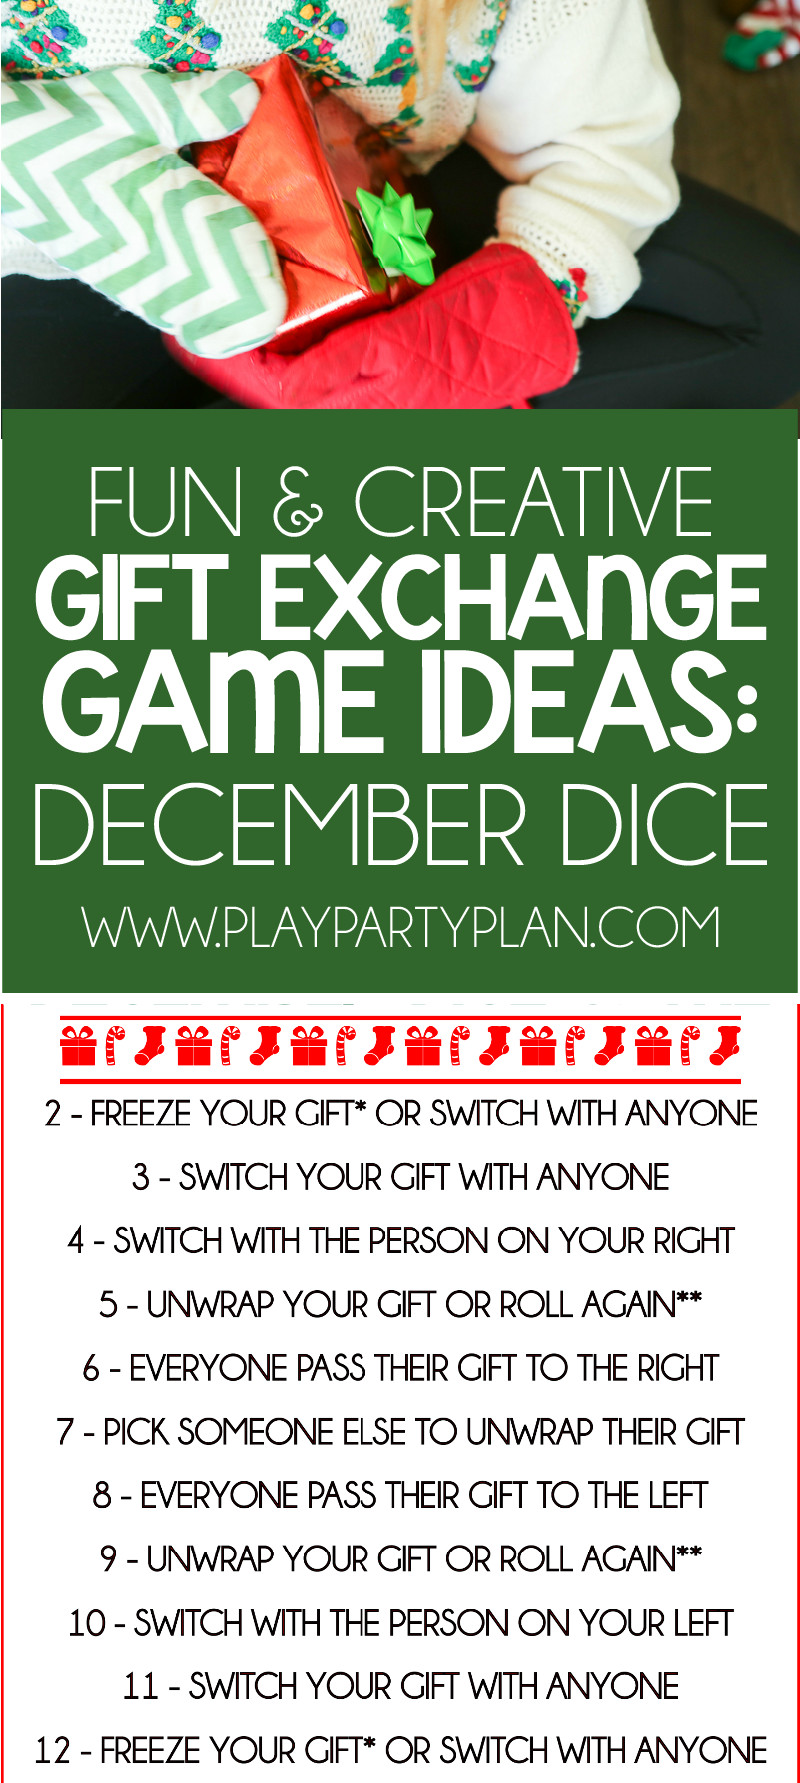 Holiday Gift Exchange Ideas For Groups
 These t exchange ideas are the most unique and creative